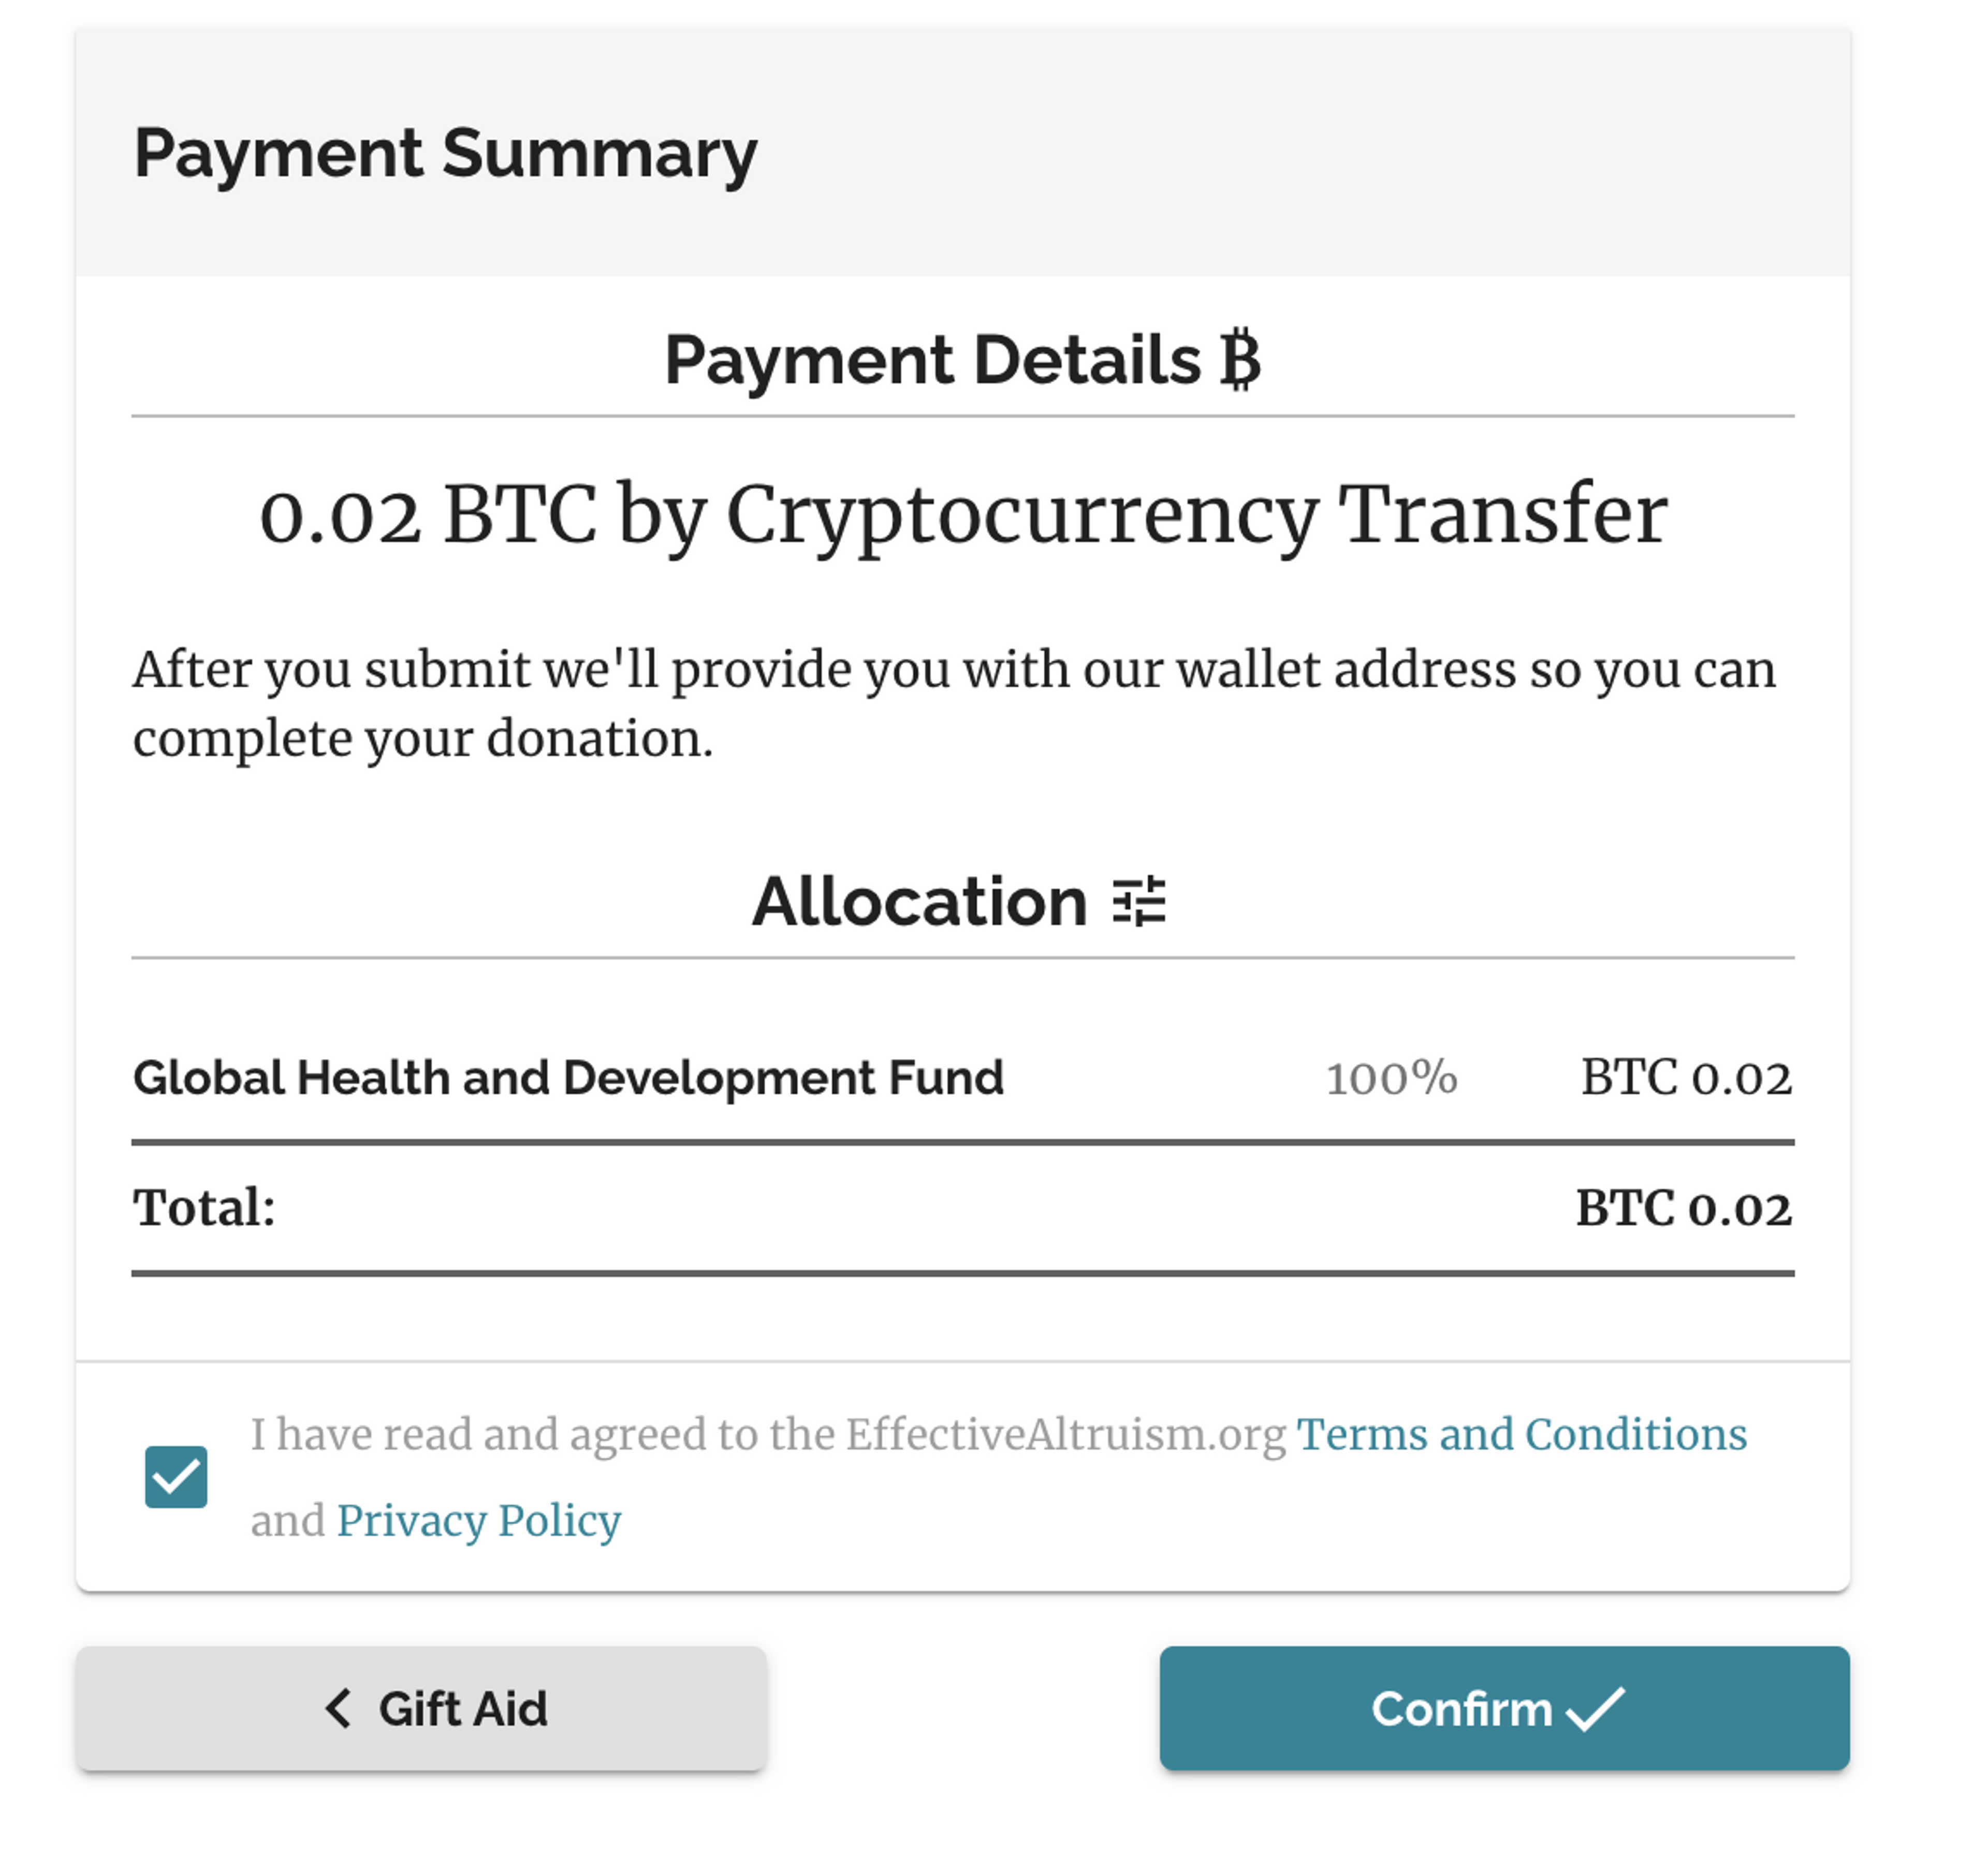 Payment Summary Page